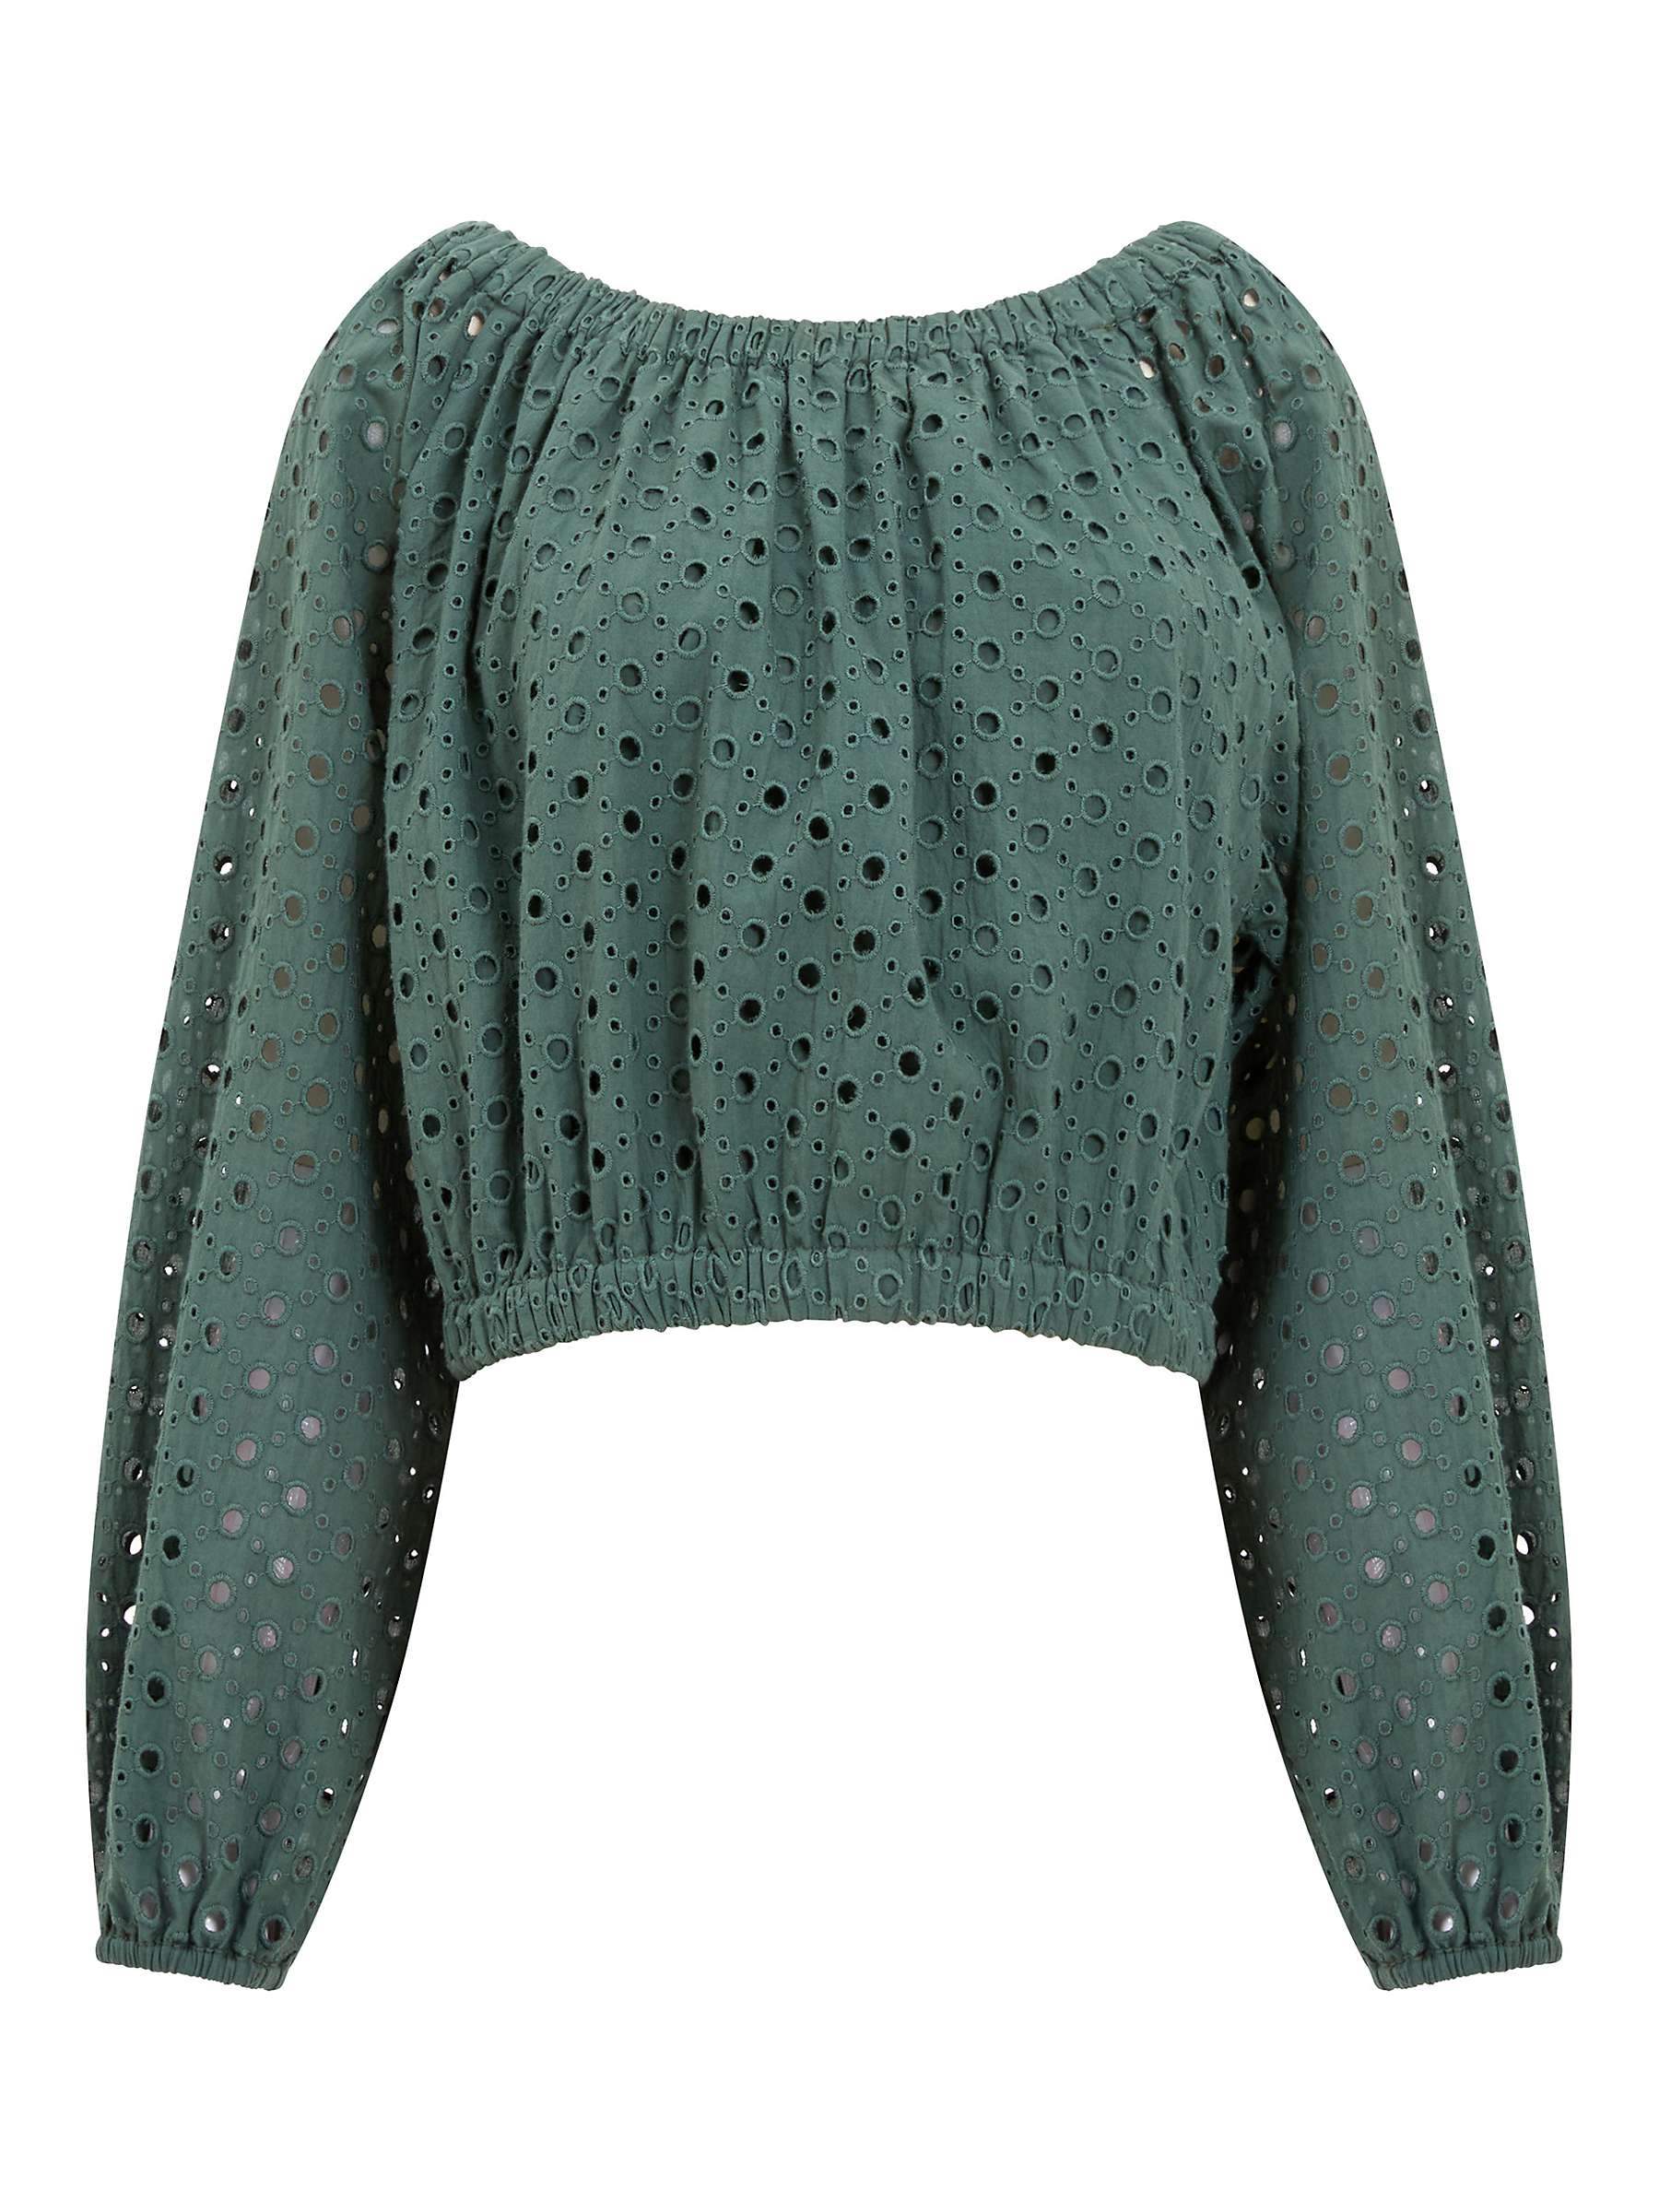 Buy Great Plains Atol Embroidery Long Sleeve Top, Tropical Green Online at johnlewis.com